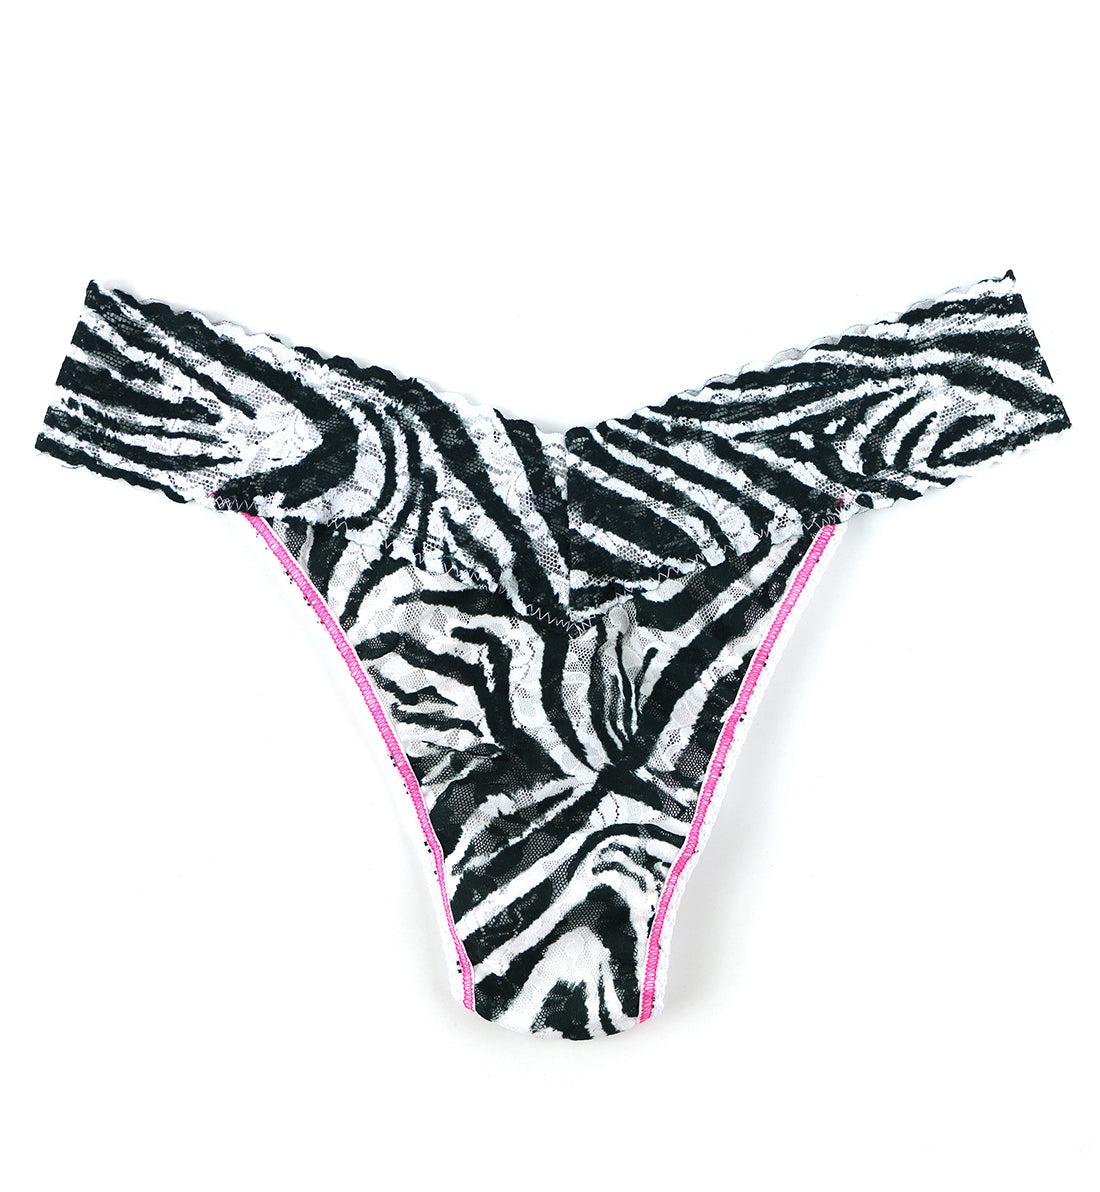 Hanky Panky Decades Aughts Zebra Original Rise Thong PLUS - Aughts Zebra,One Size